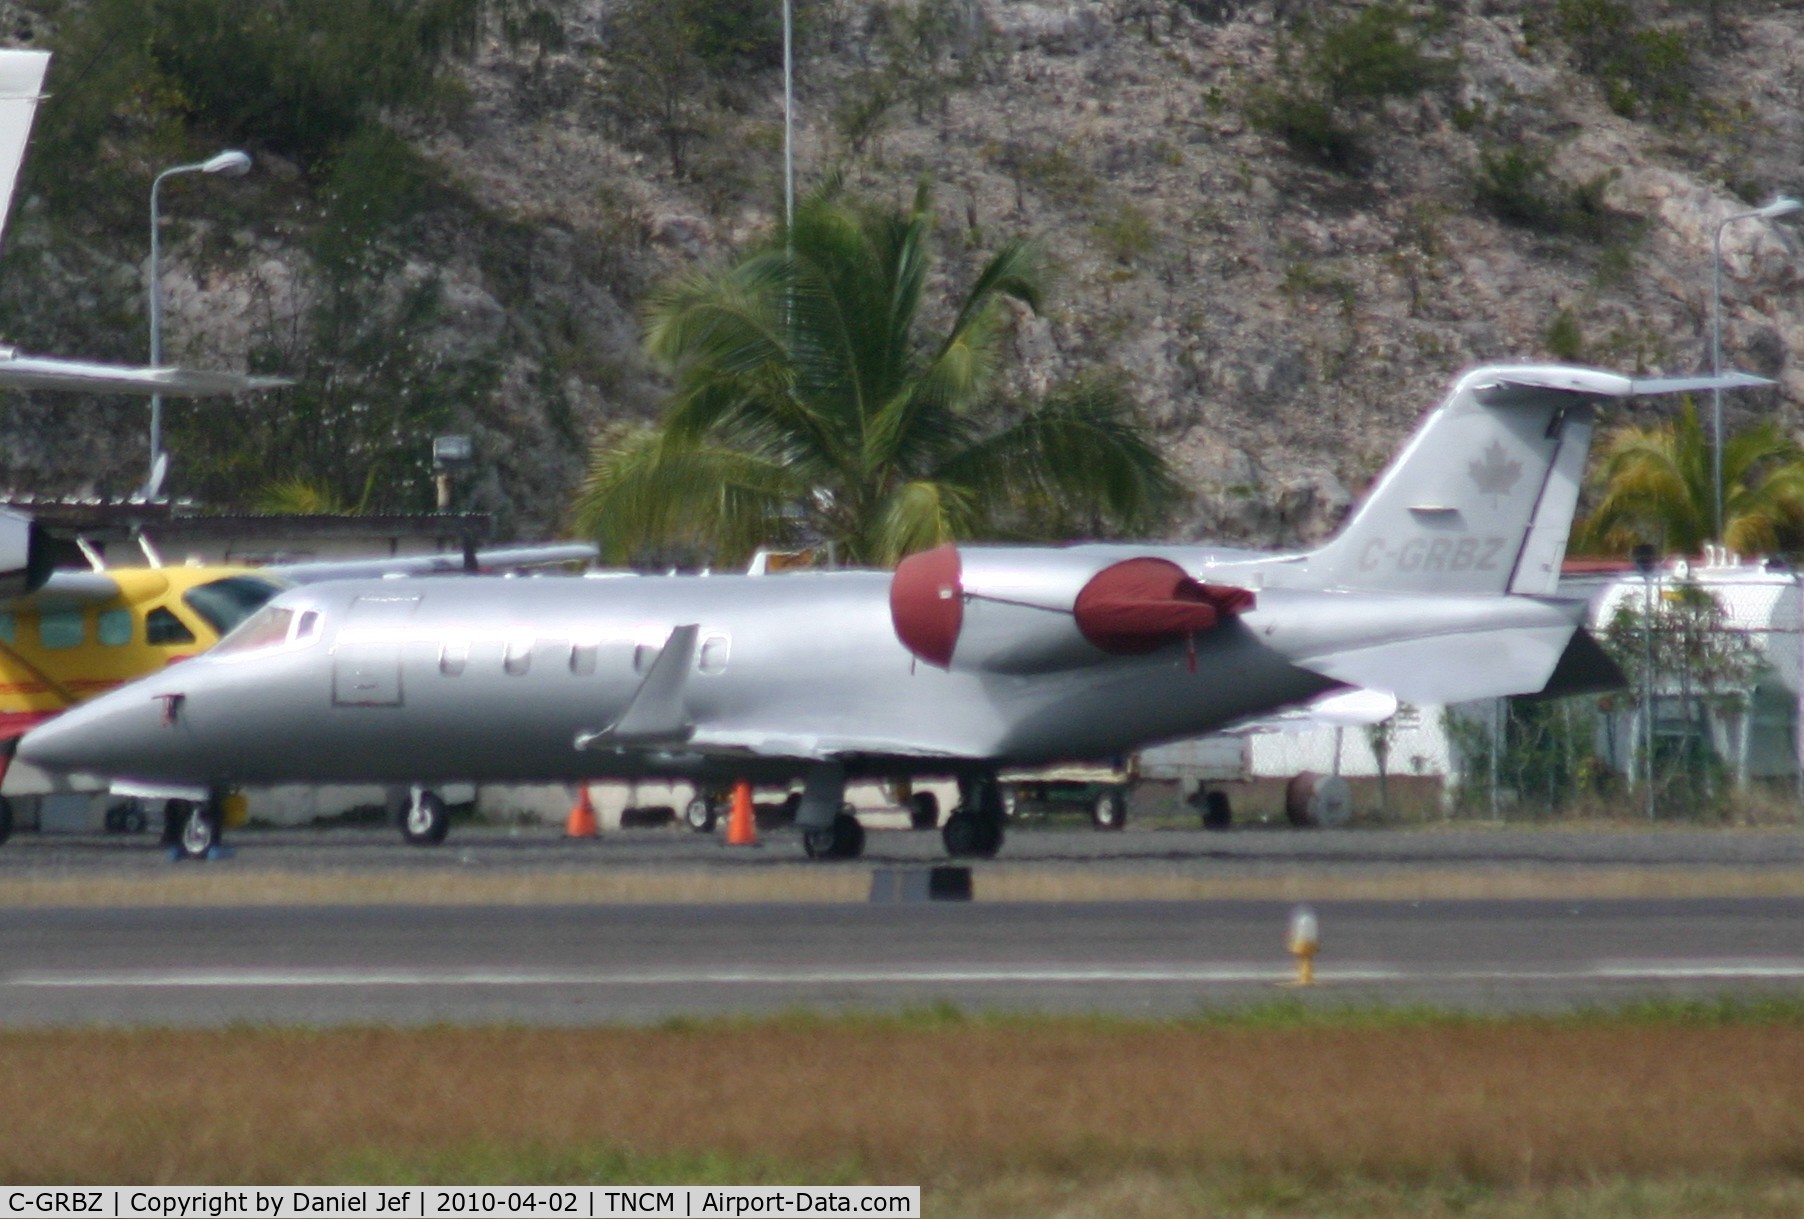 C-GRBZ, 2001 Learjet 60 C/N 60-218, C-GRBZ with some low tone grey there looks almost like some navy shit!!!! lol